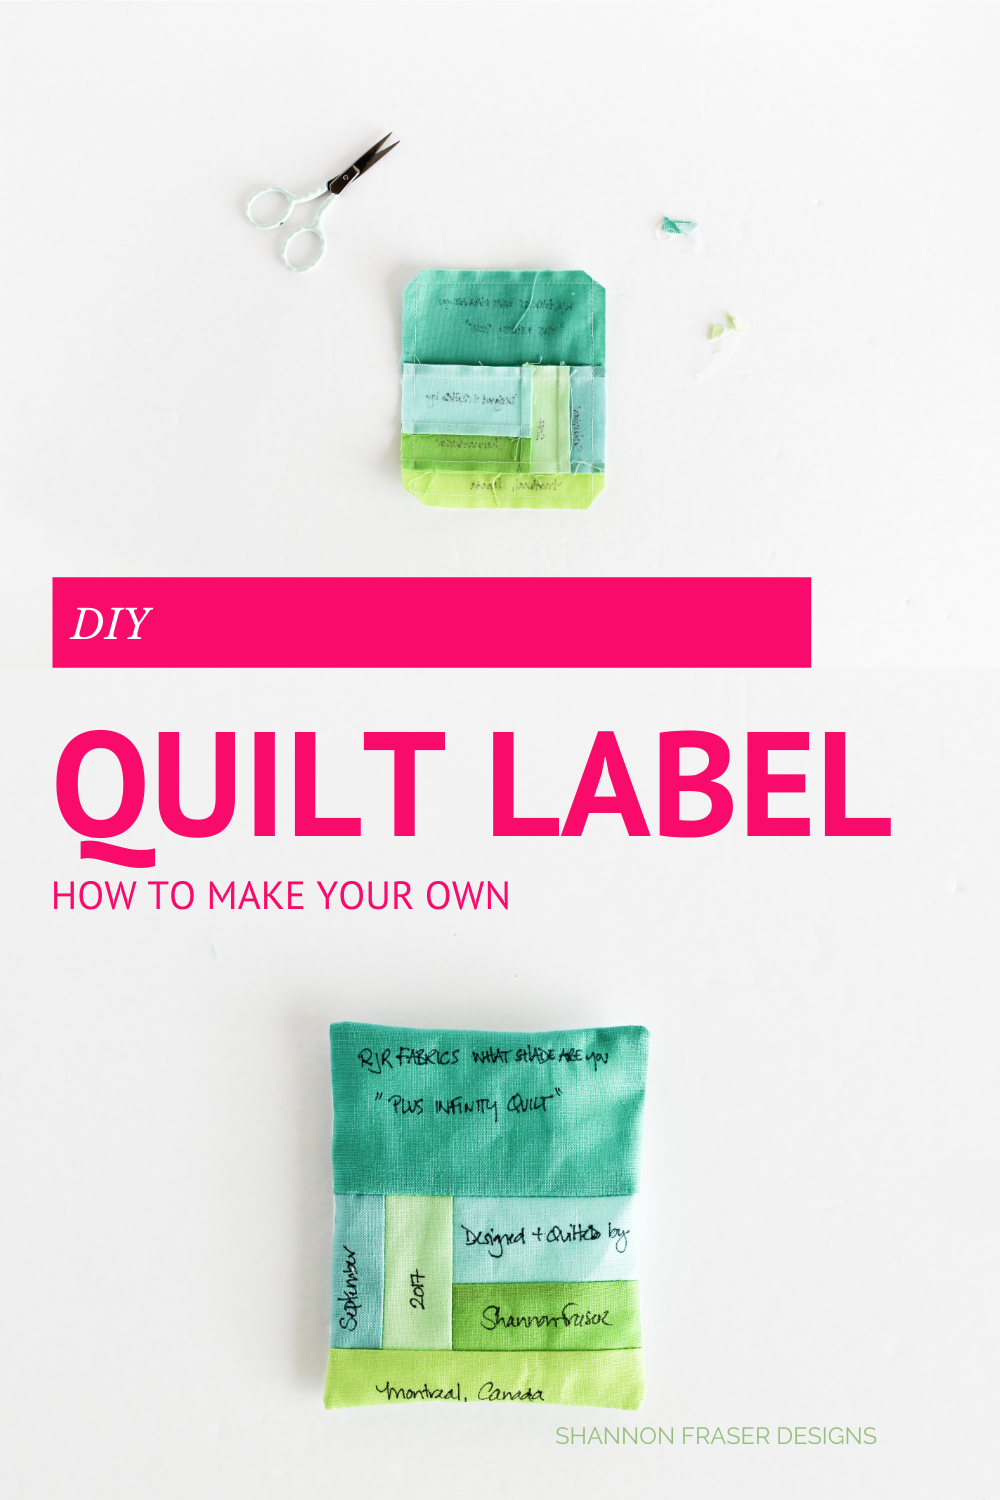 DIY quilt label tutorial with step by step pictures and instructions + free pattern download to make your own quilt labels at home | Shannon Fraser Designs #quilttutorial #quiltlabel